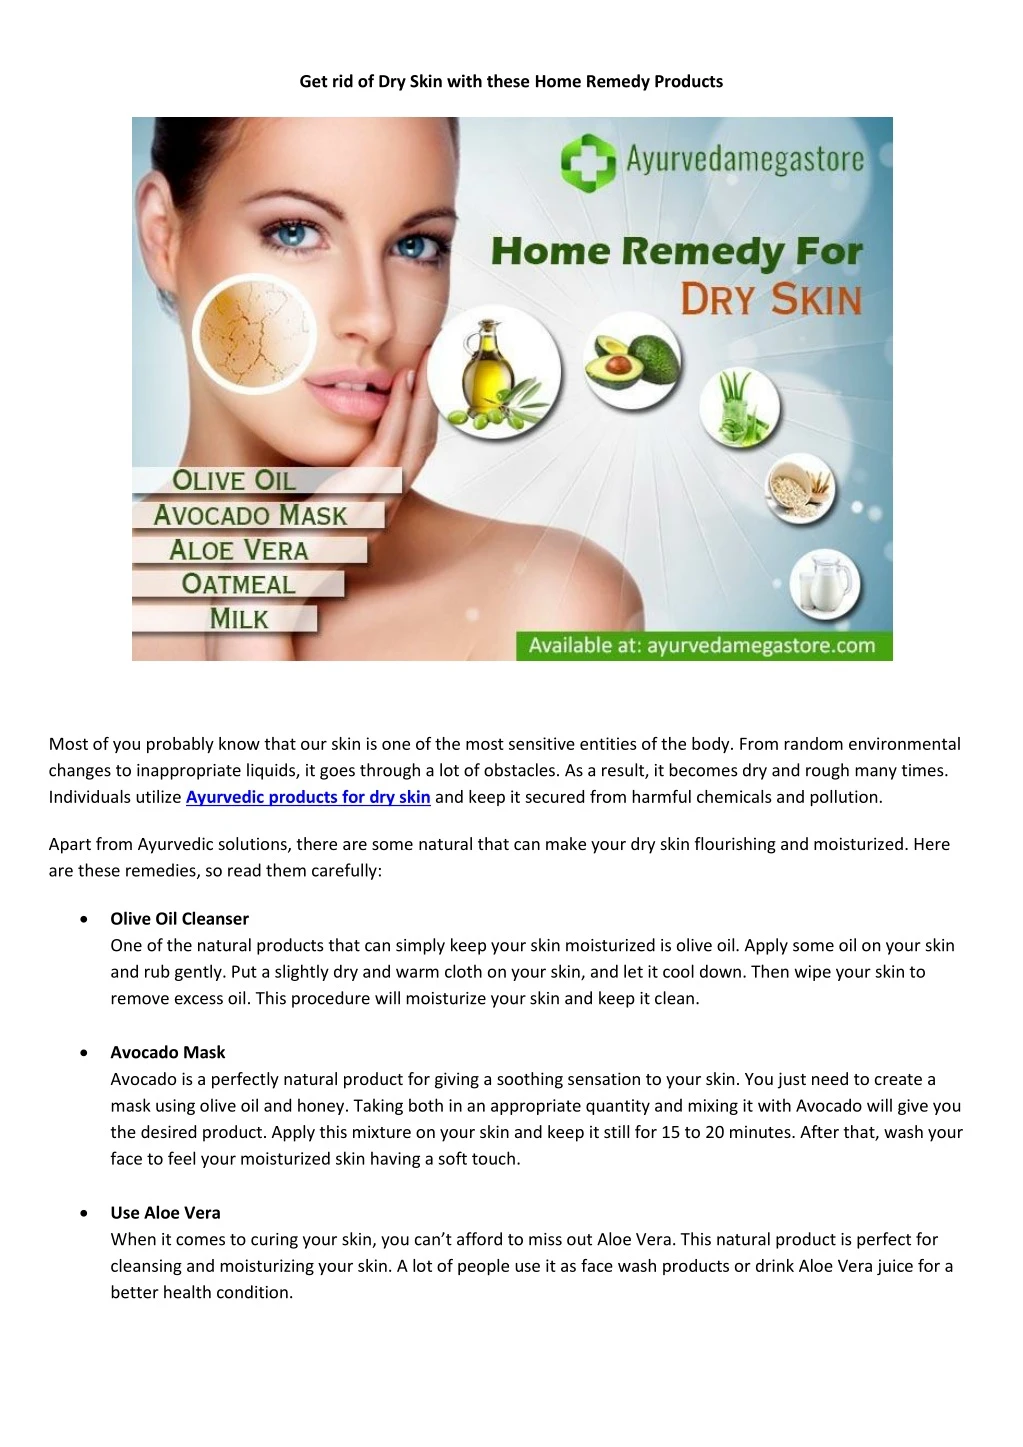 get rid of dry skin with these home remedy